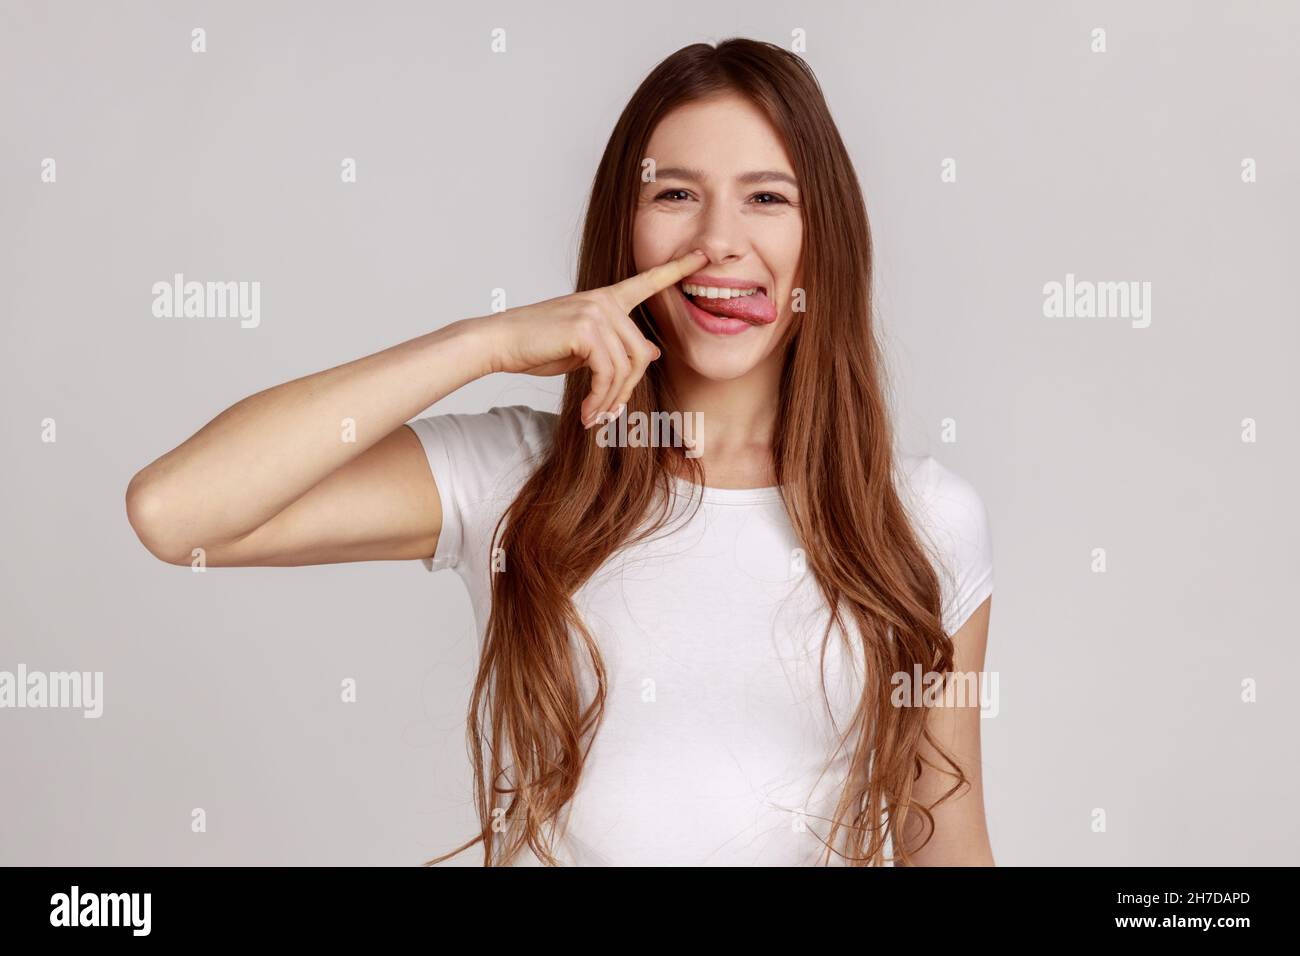 Funny cheerful woman picking nose with stupid silly face, pulling out boogers, bad manners concept, misconduct, wearing white T-shirt. Indoor studio shot isolated on gray background. Stock Photo